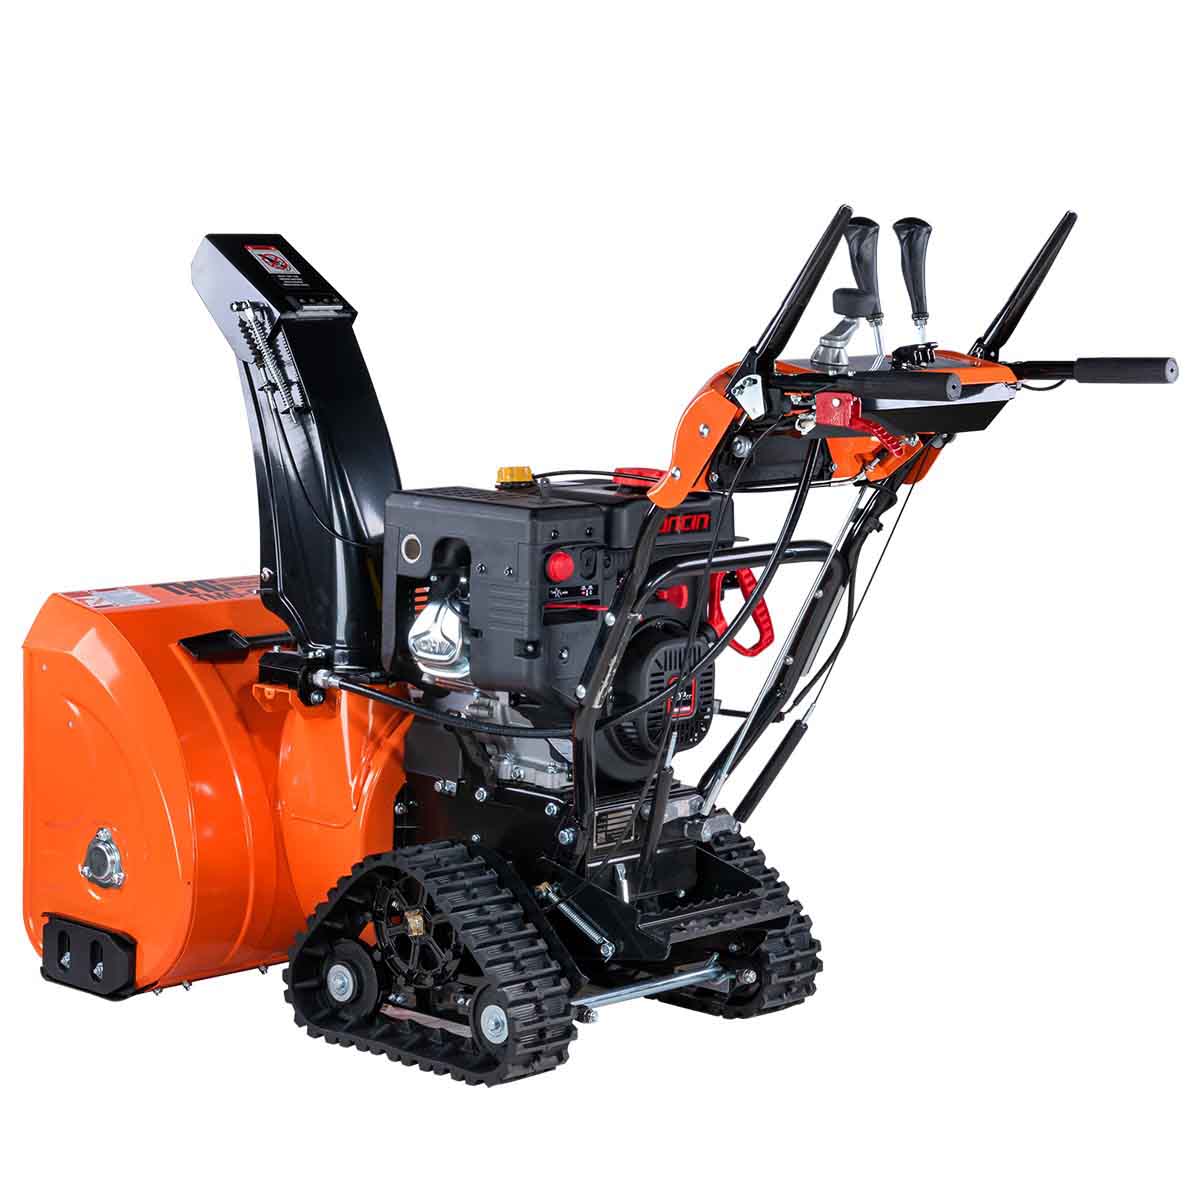 New Premium 30” Self-Propelled Gas-Powered Snow Blower, Dual-Stage, Rubber Track, Heated Hand Grips, Electric Start